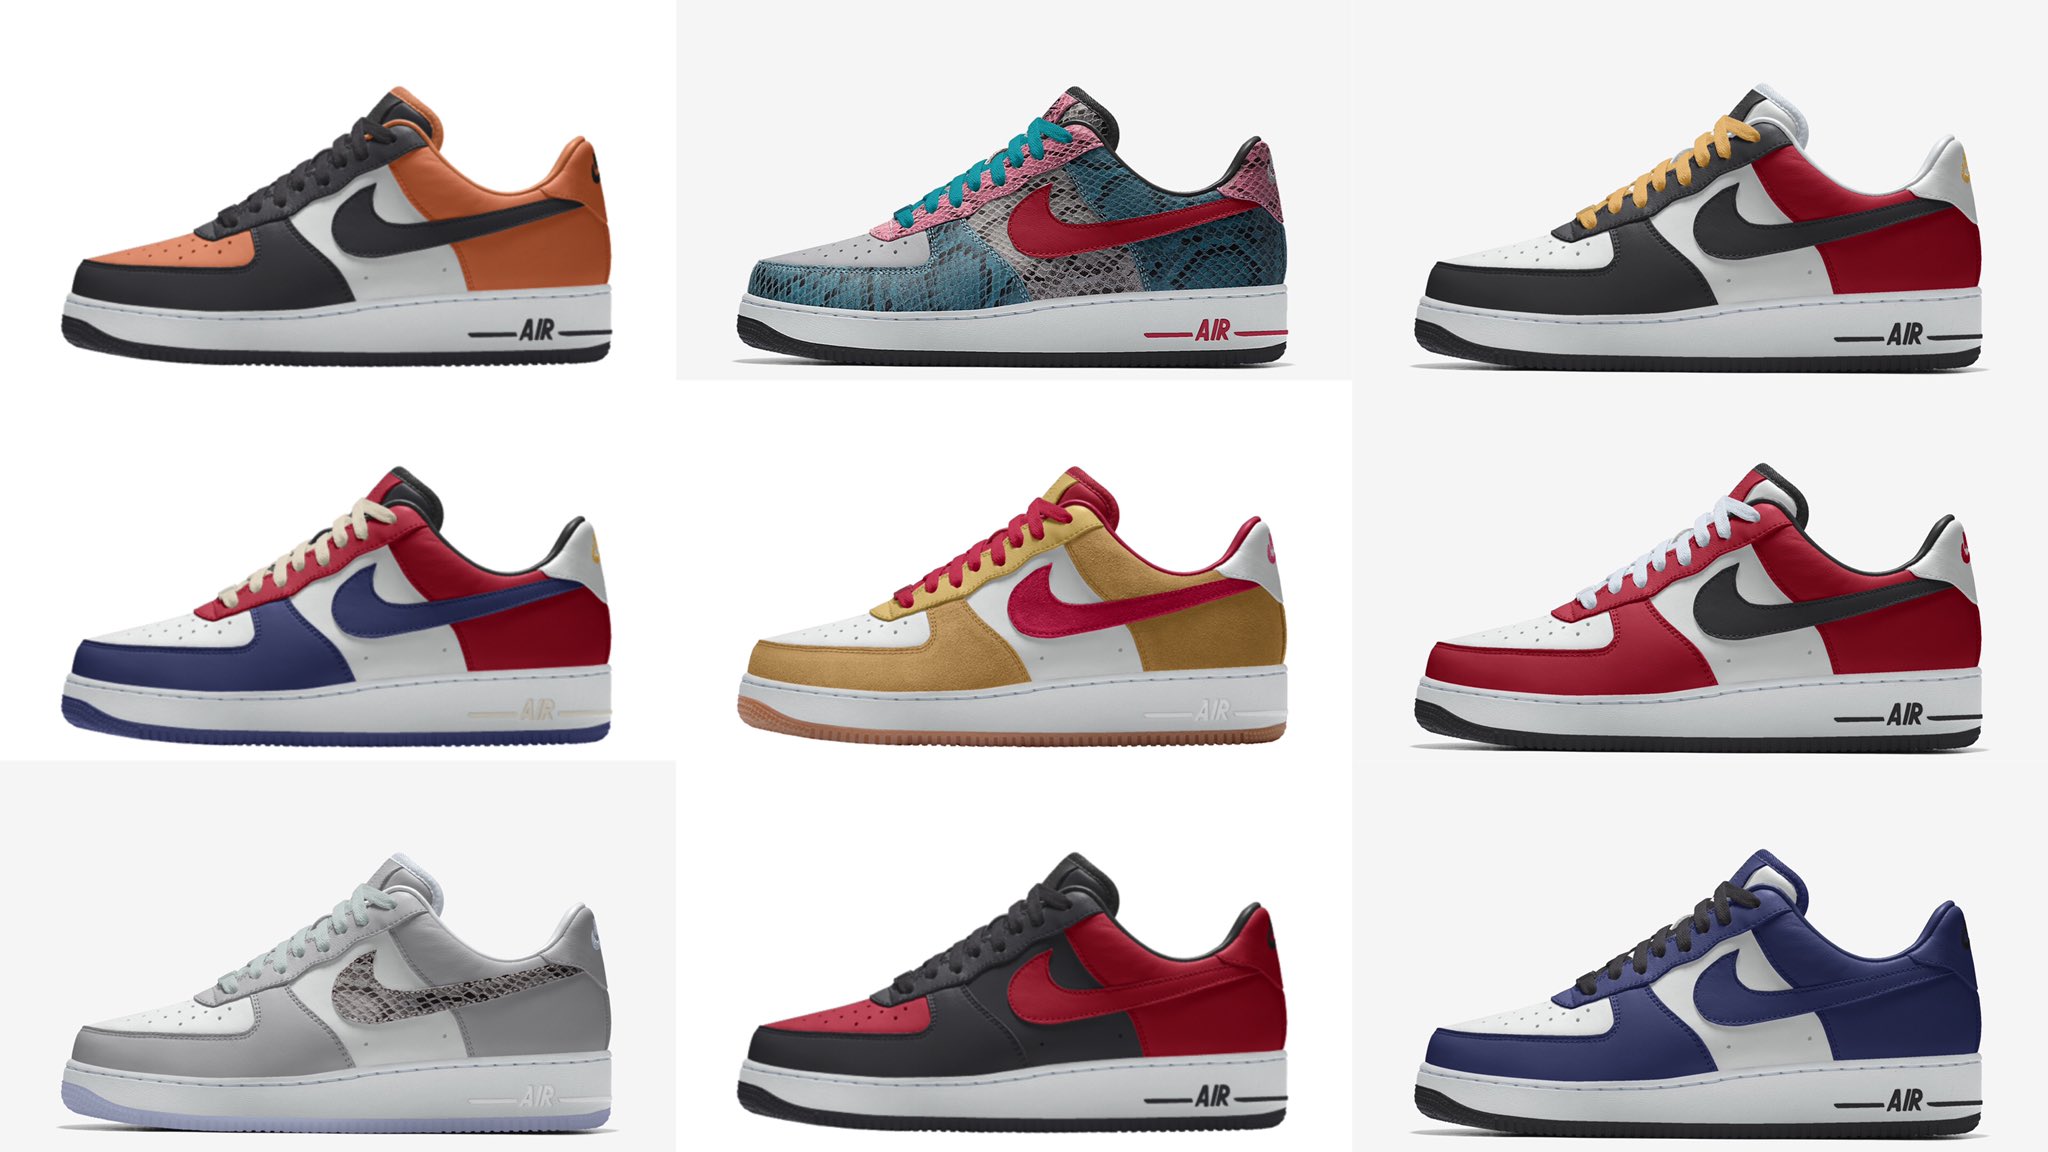 Snkr Twitr Nike Air Force 1 Low Unlocked By You Available Via Nikestore T Co D38koblydf Popular Option Designs Chosen By Others Ad T Co P4helg5qly